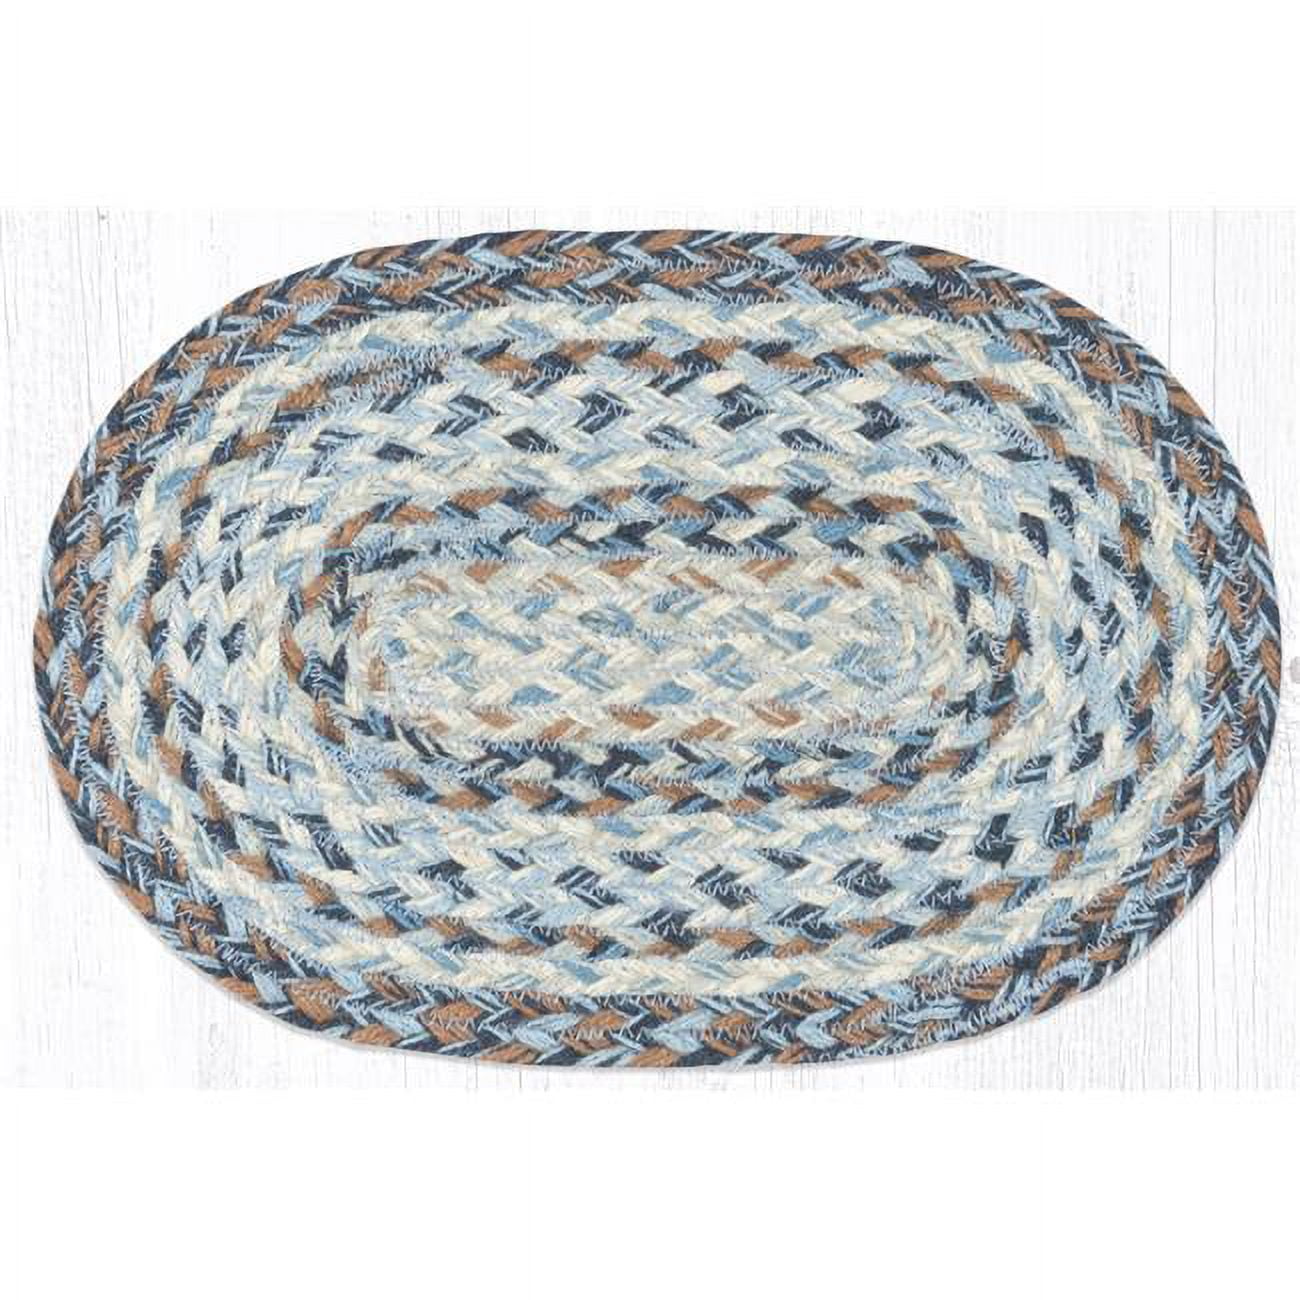 Capitol Importing 00-9-119 10 X 15 In. Ms 9-119 Denim Oval Swatch